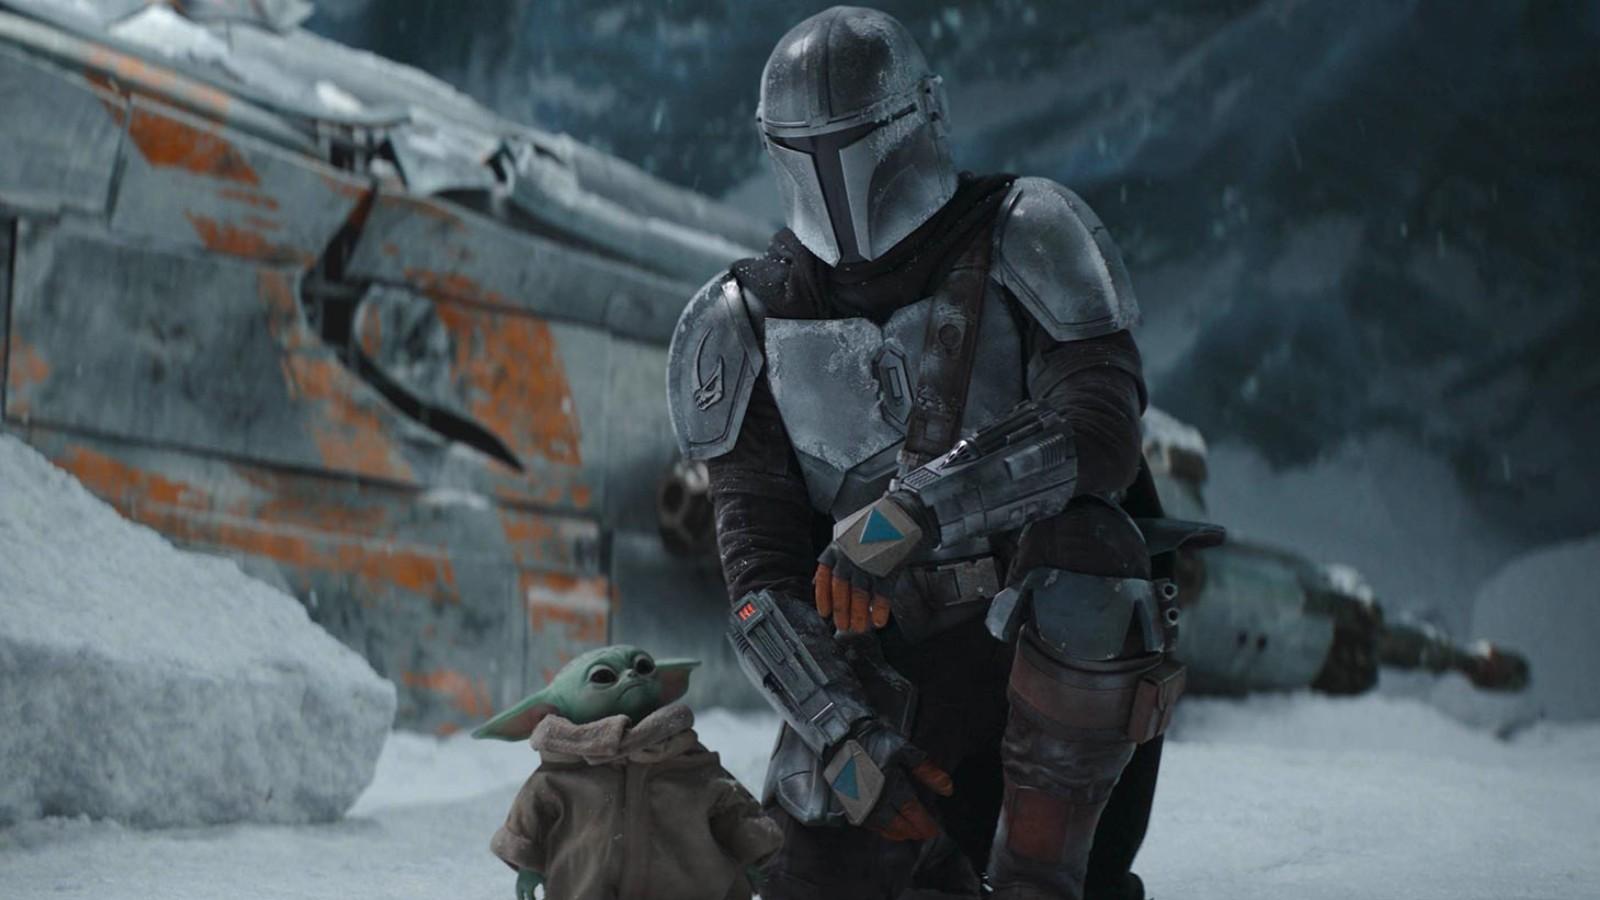 The Mandalorian and Baby Yoda in episode 2